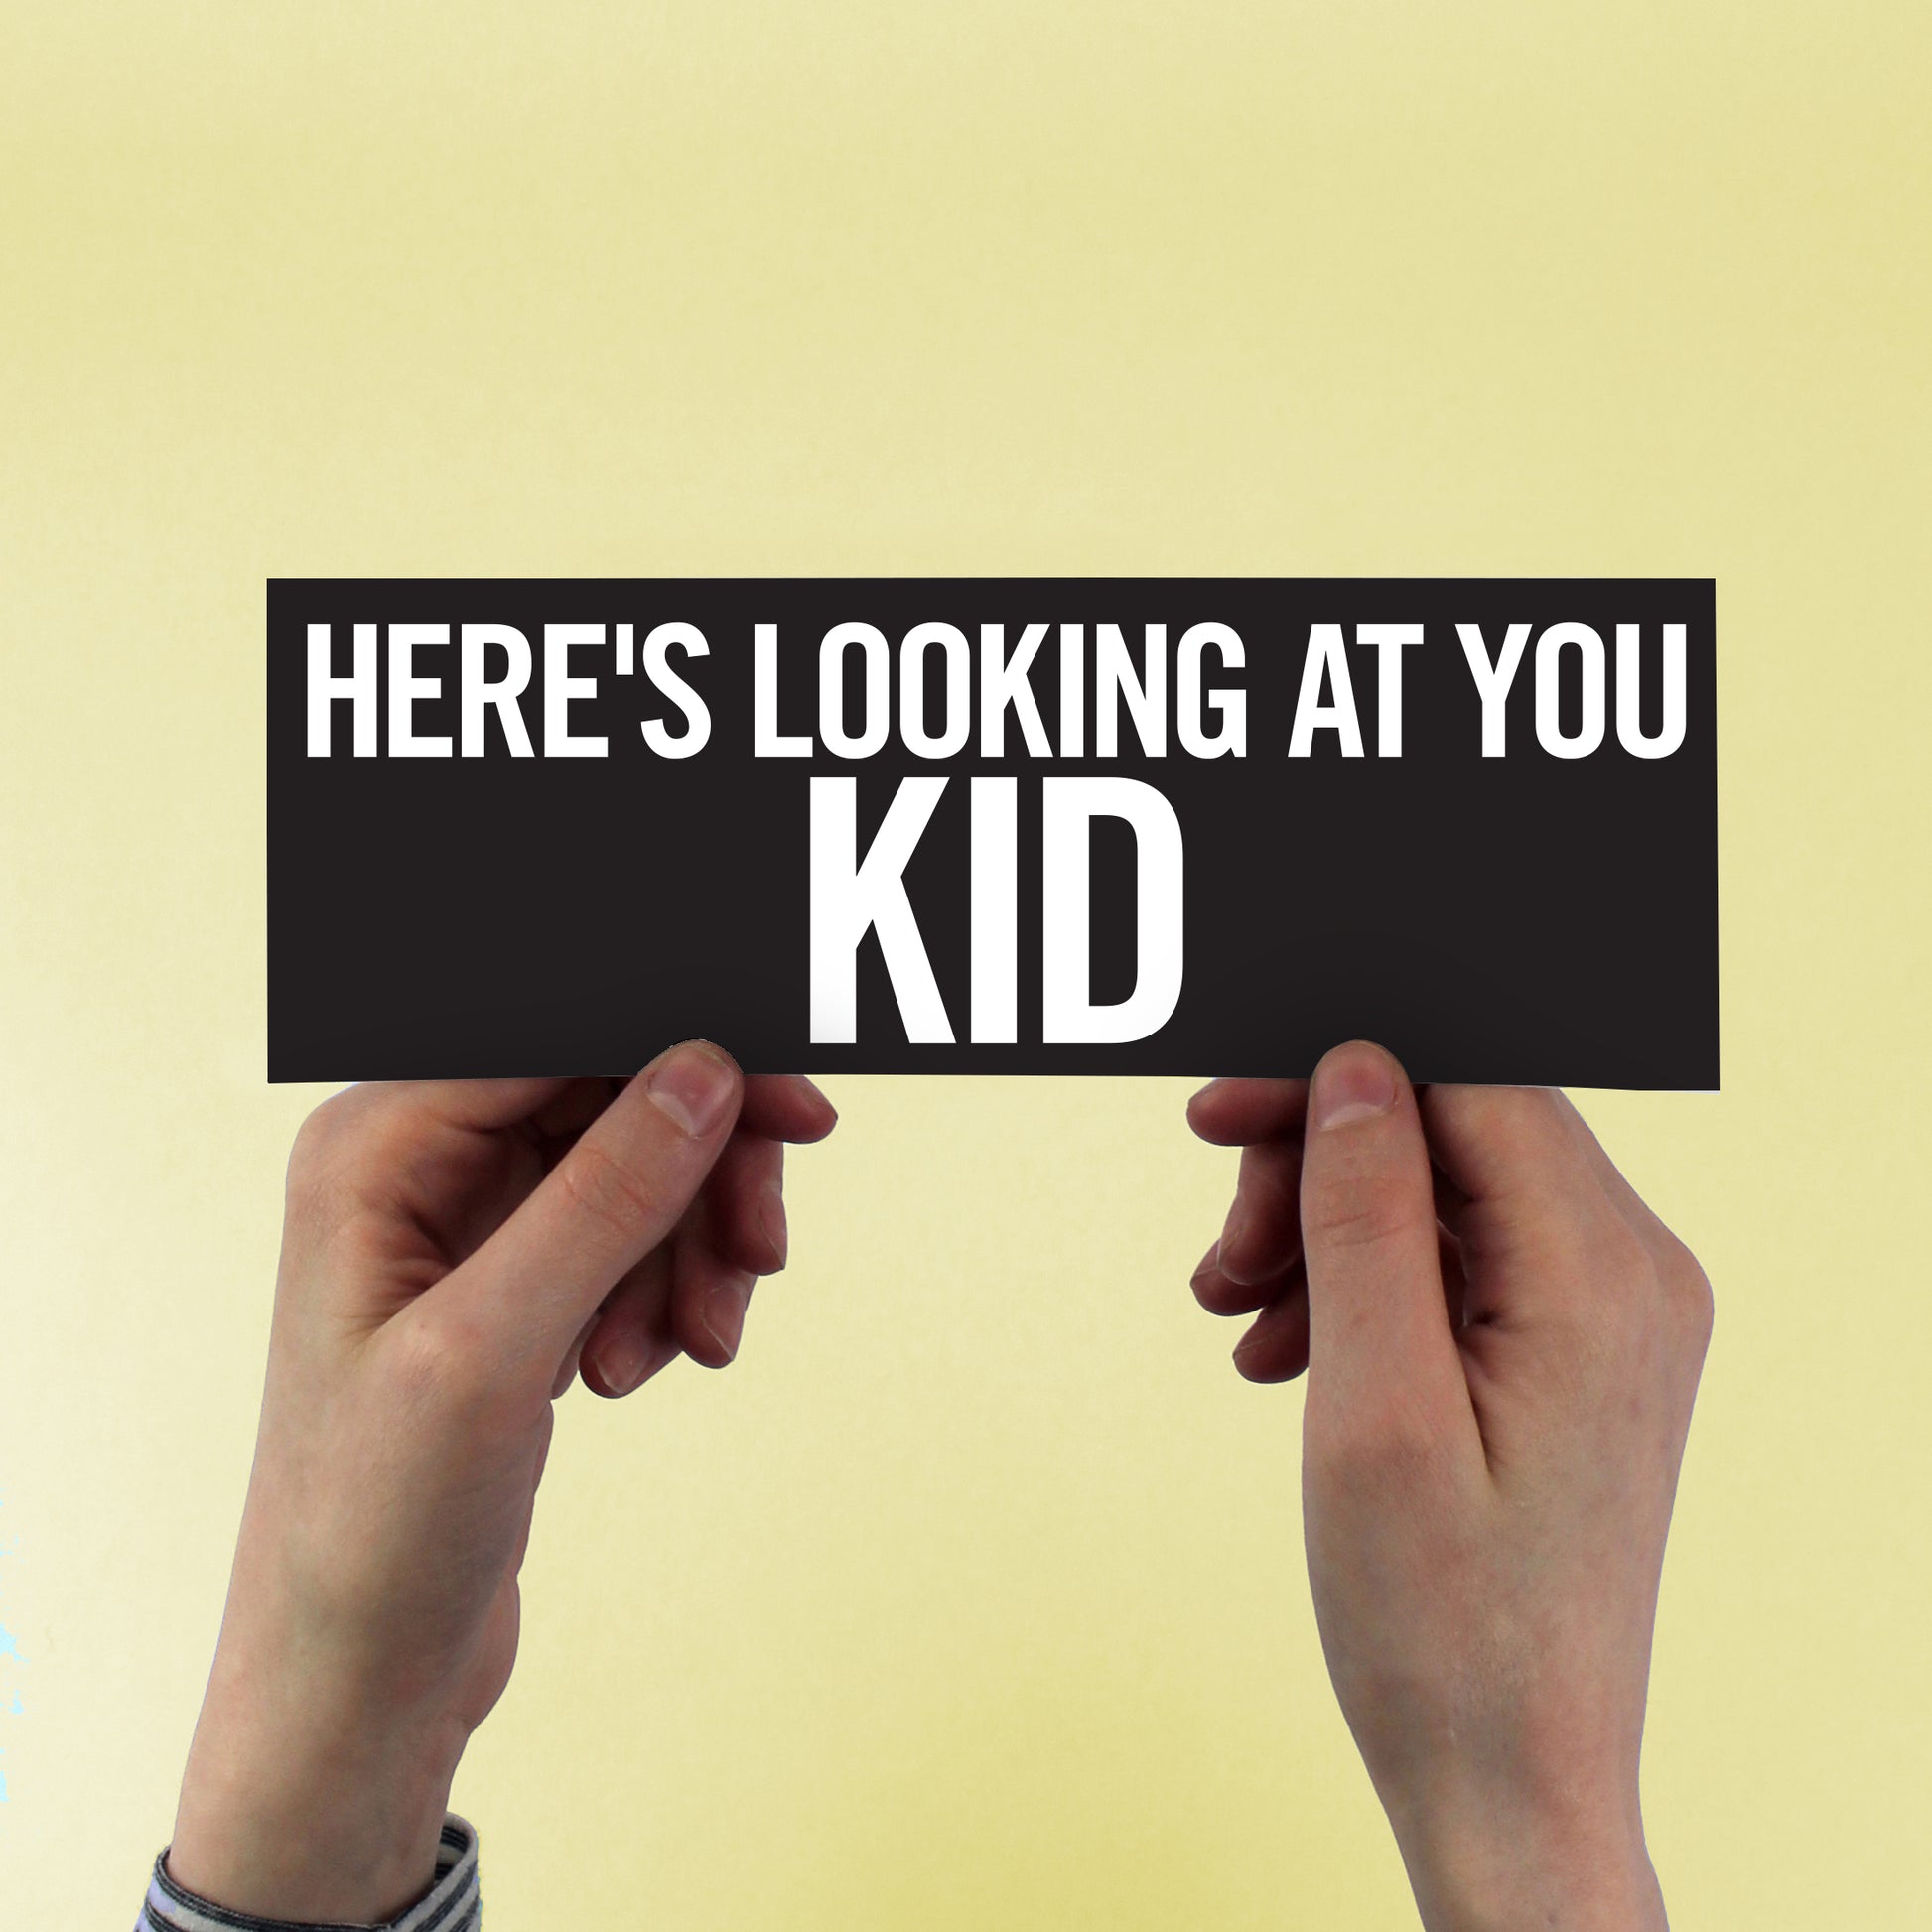 Casablanca "Here's looking at you, kid" Bumper Sticker